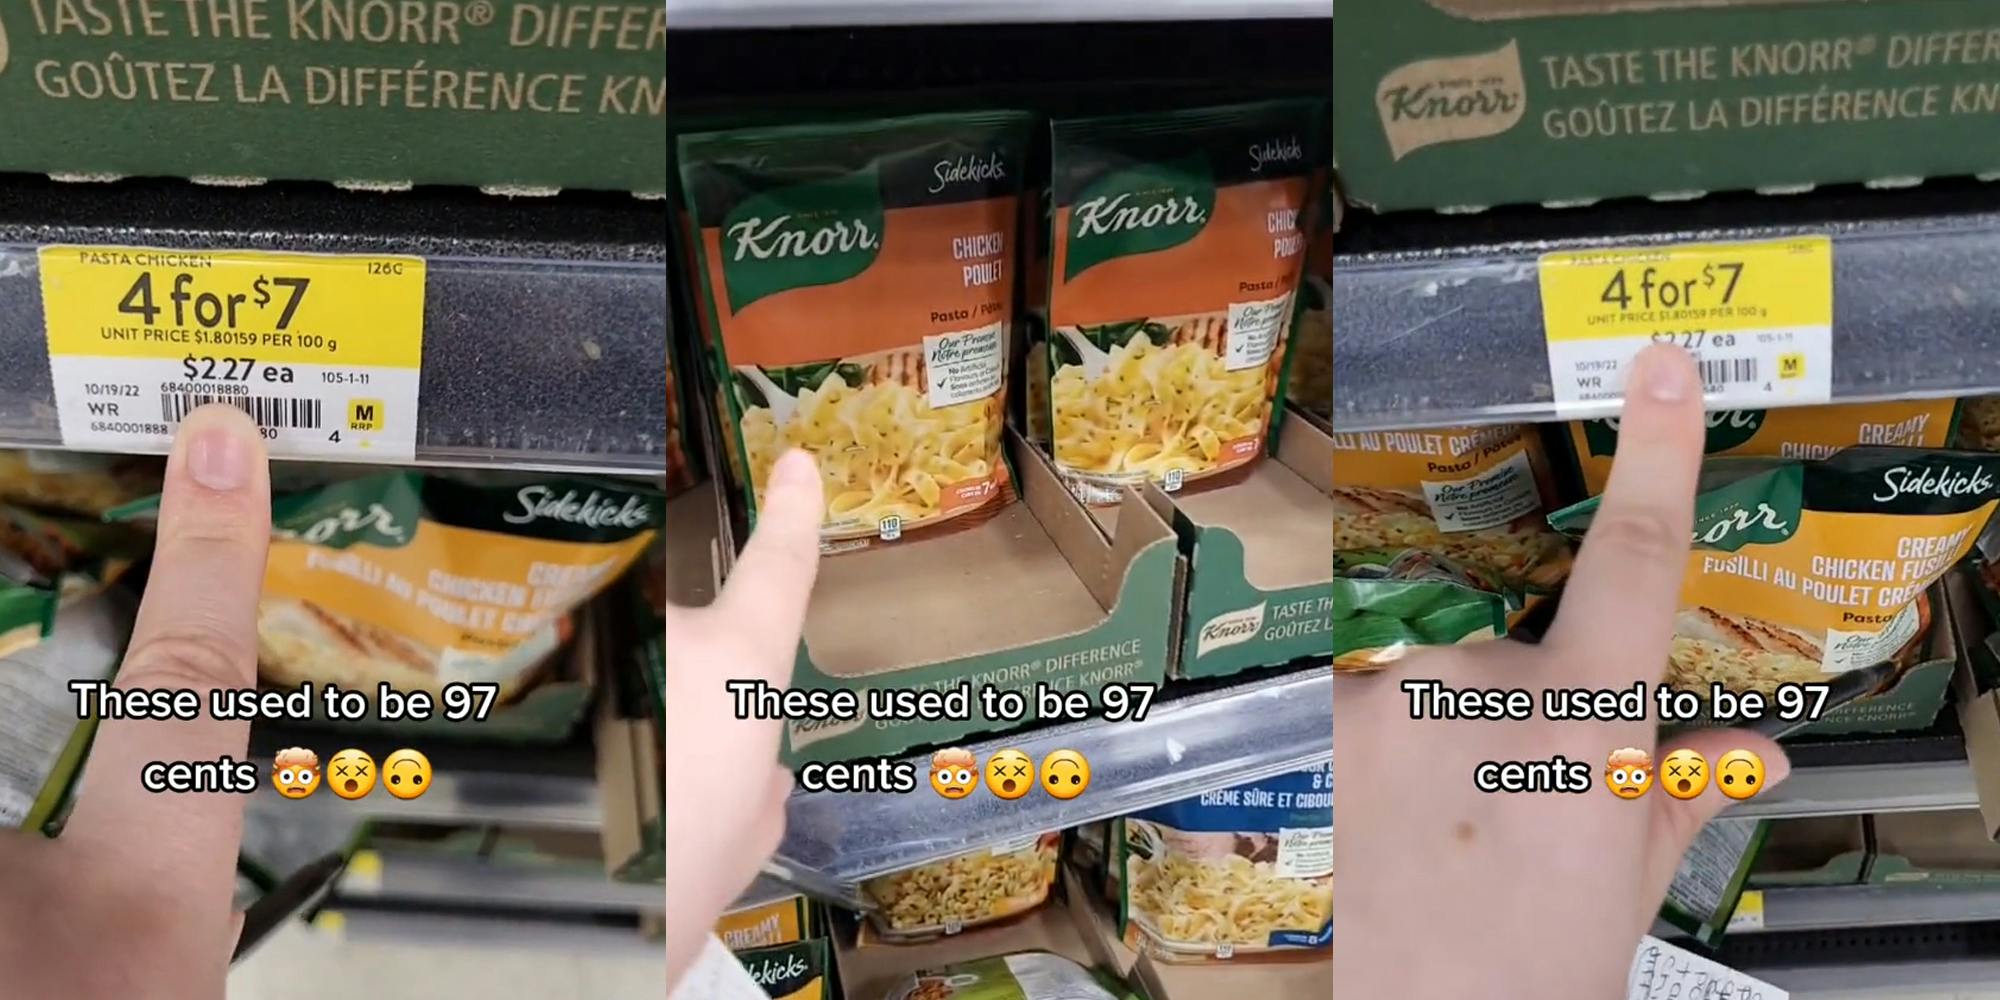 Knorr Sidekicks in store with price tag and caption "These used to be 97 cents" (l) Knorr Sidekicks in store with caption "These used to be 97 cents" (c) Knorr Sidekicks in store with price tag and caption "These used to be 97 cents" (r)